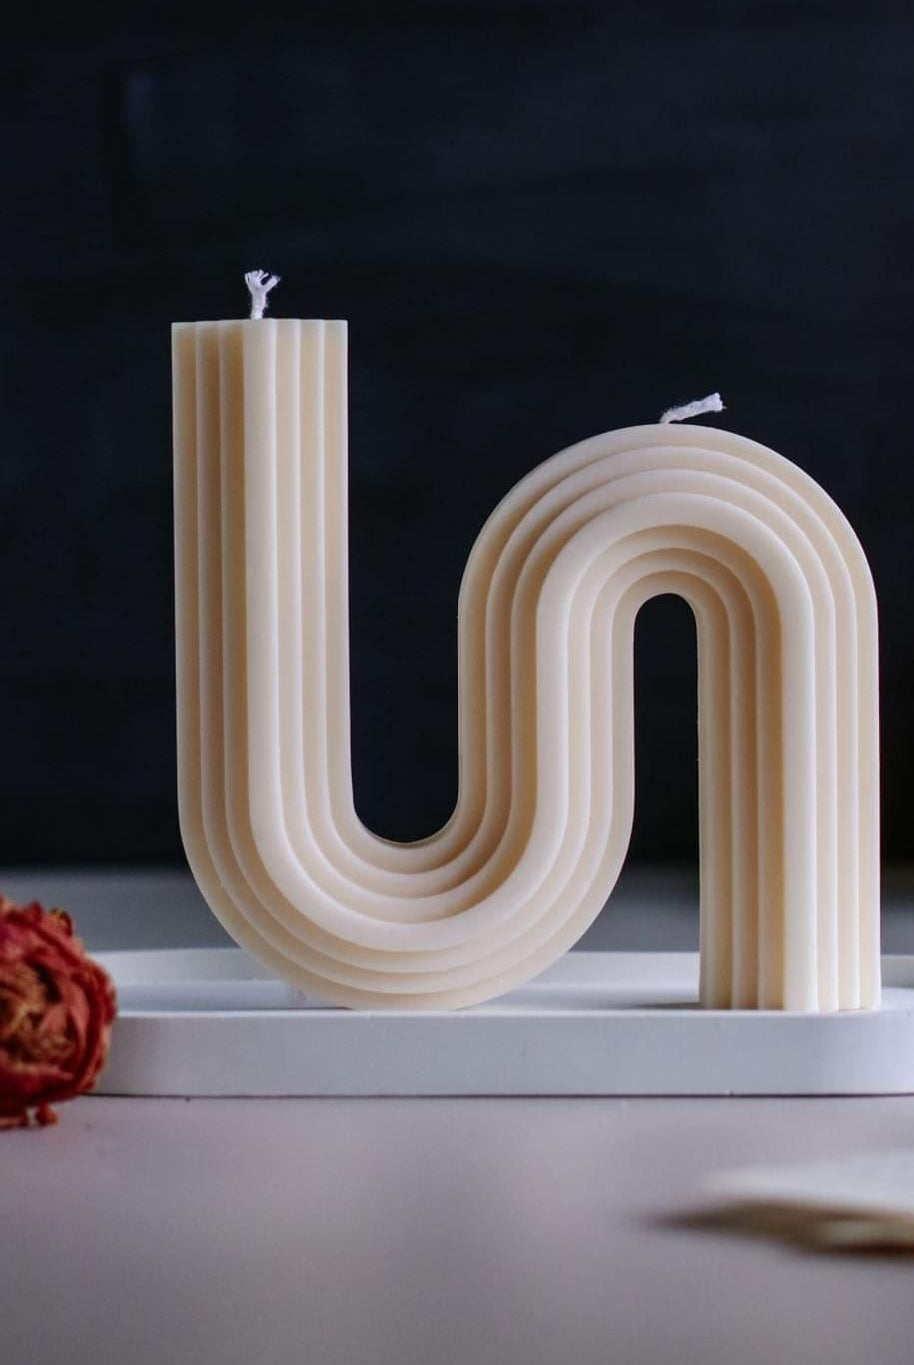 Large Wavy Candle Mould 1 - Silicone Mould, Mold for DIY Candles. Created using candle making kit with cotton candle wicks and candle colour chips. Using soy wax for pillar candles. Sold by Myka Candles Moulds Australia